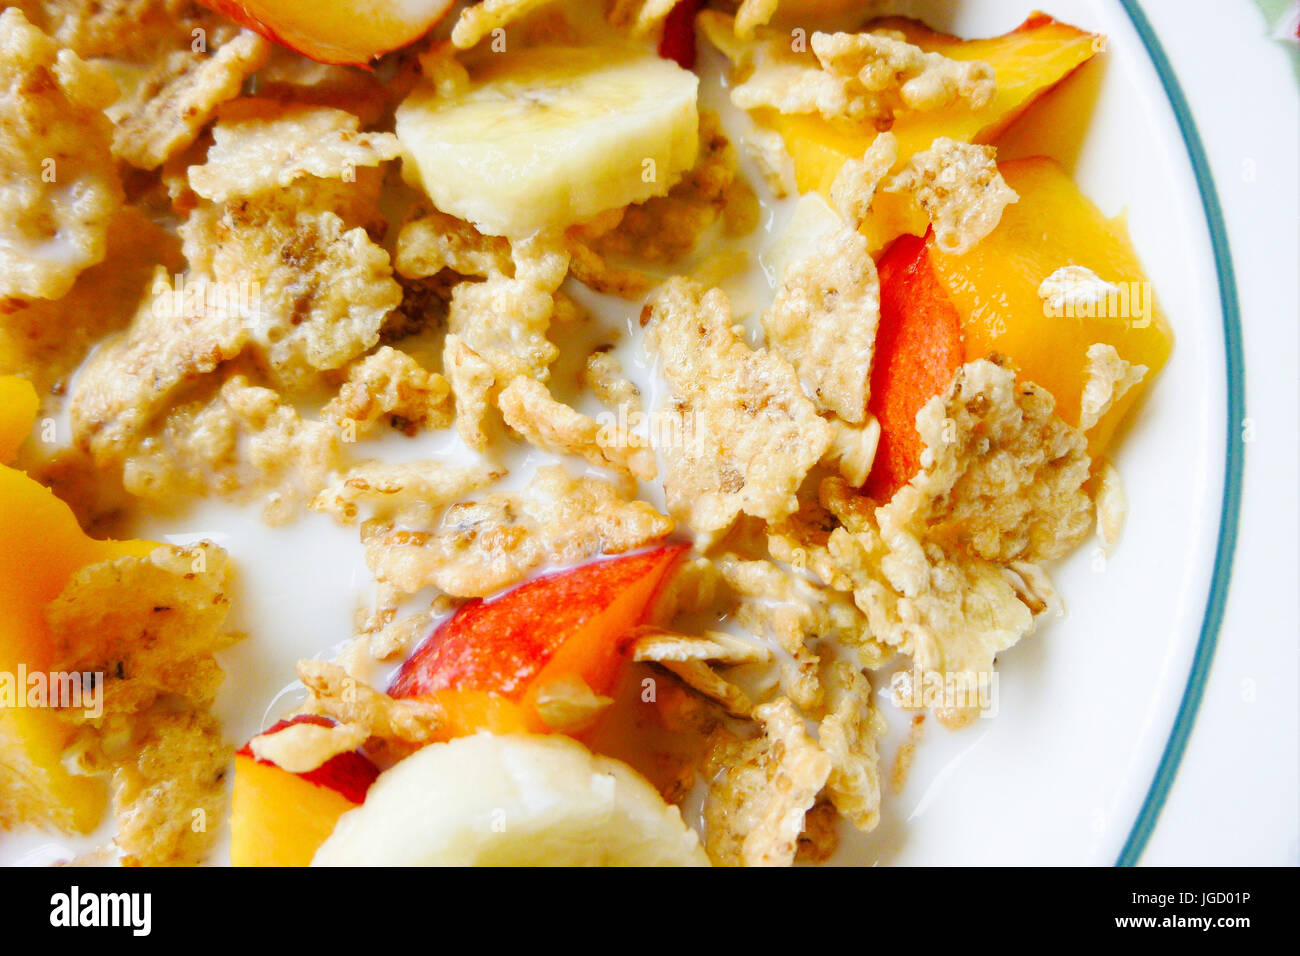 The hot weather makes a breakfast of rice flakes, nectarine and banana seem all the more appealing Stock Photo